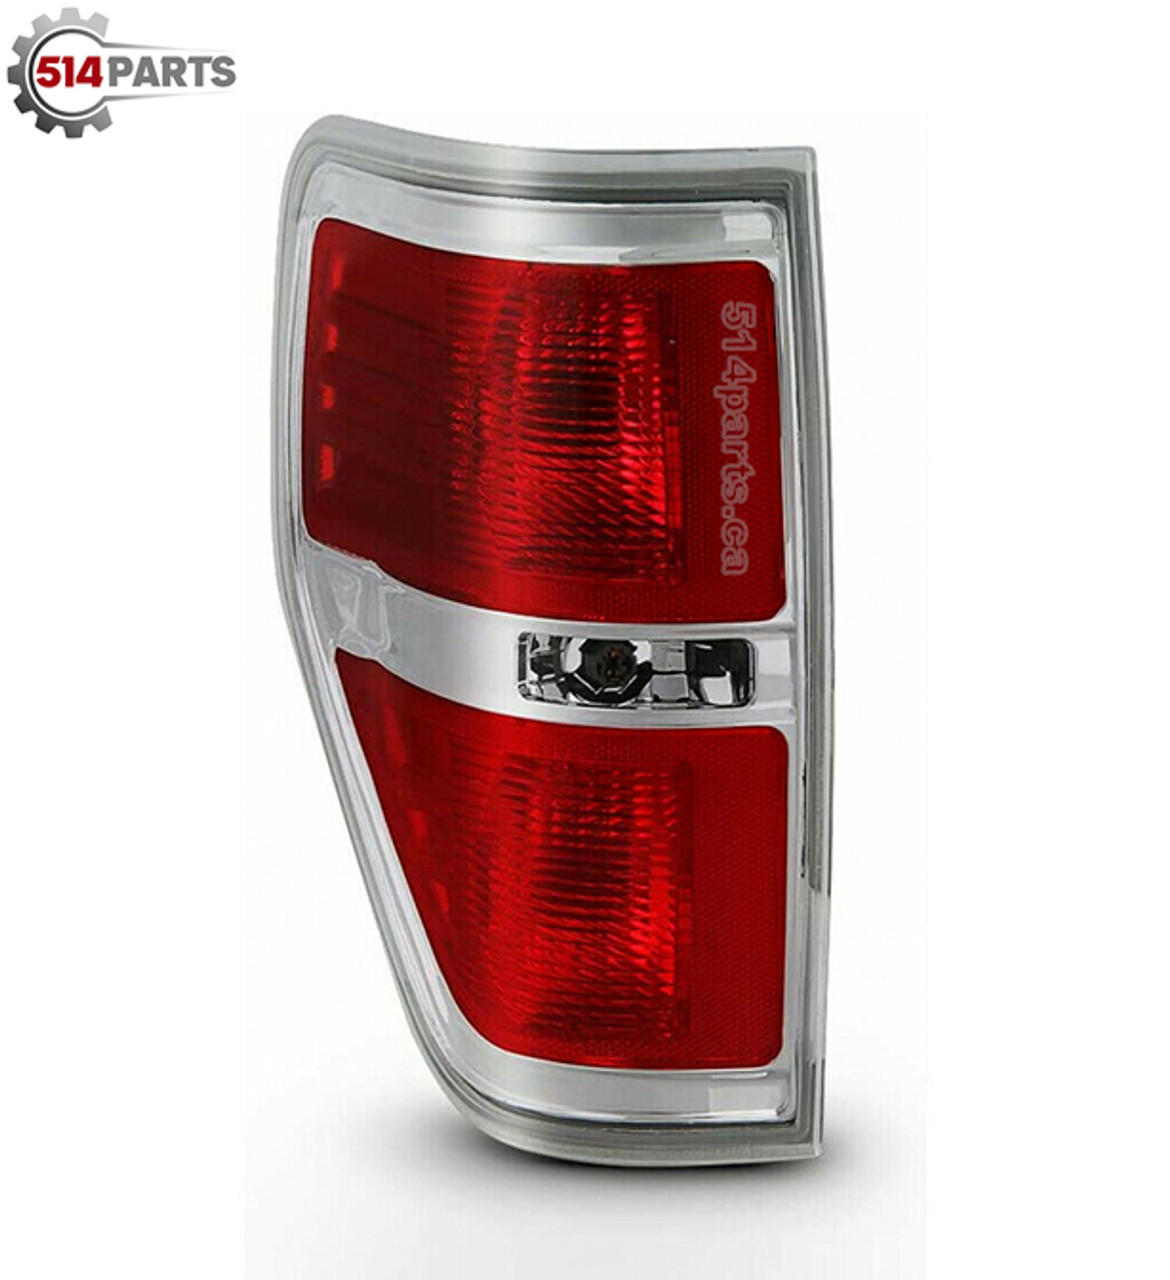 2009 - 2014 FORD F150 TAIL LIGHTS High Quality - PHARES ARRIERE Haute Qualite